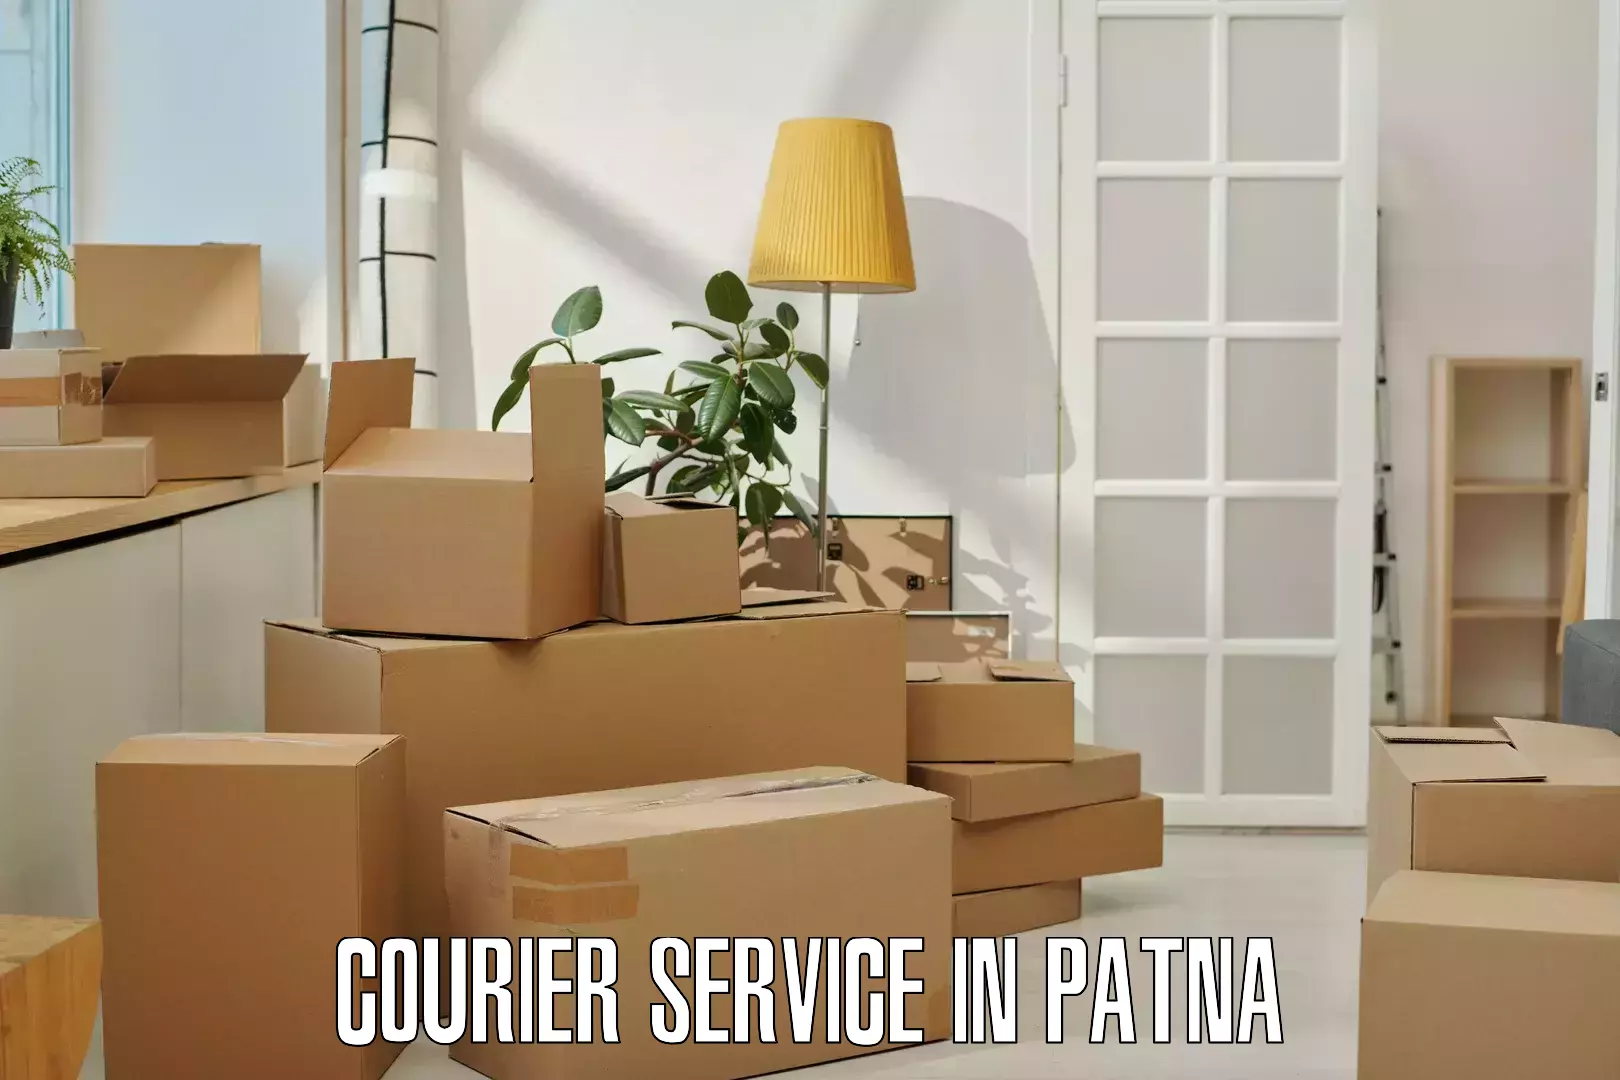 Express delivery capabilities in Patna